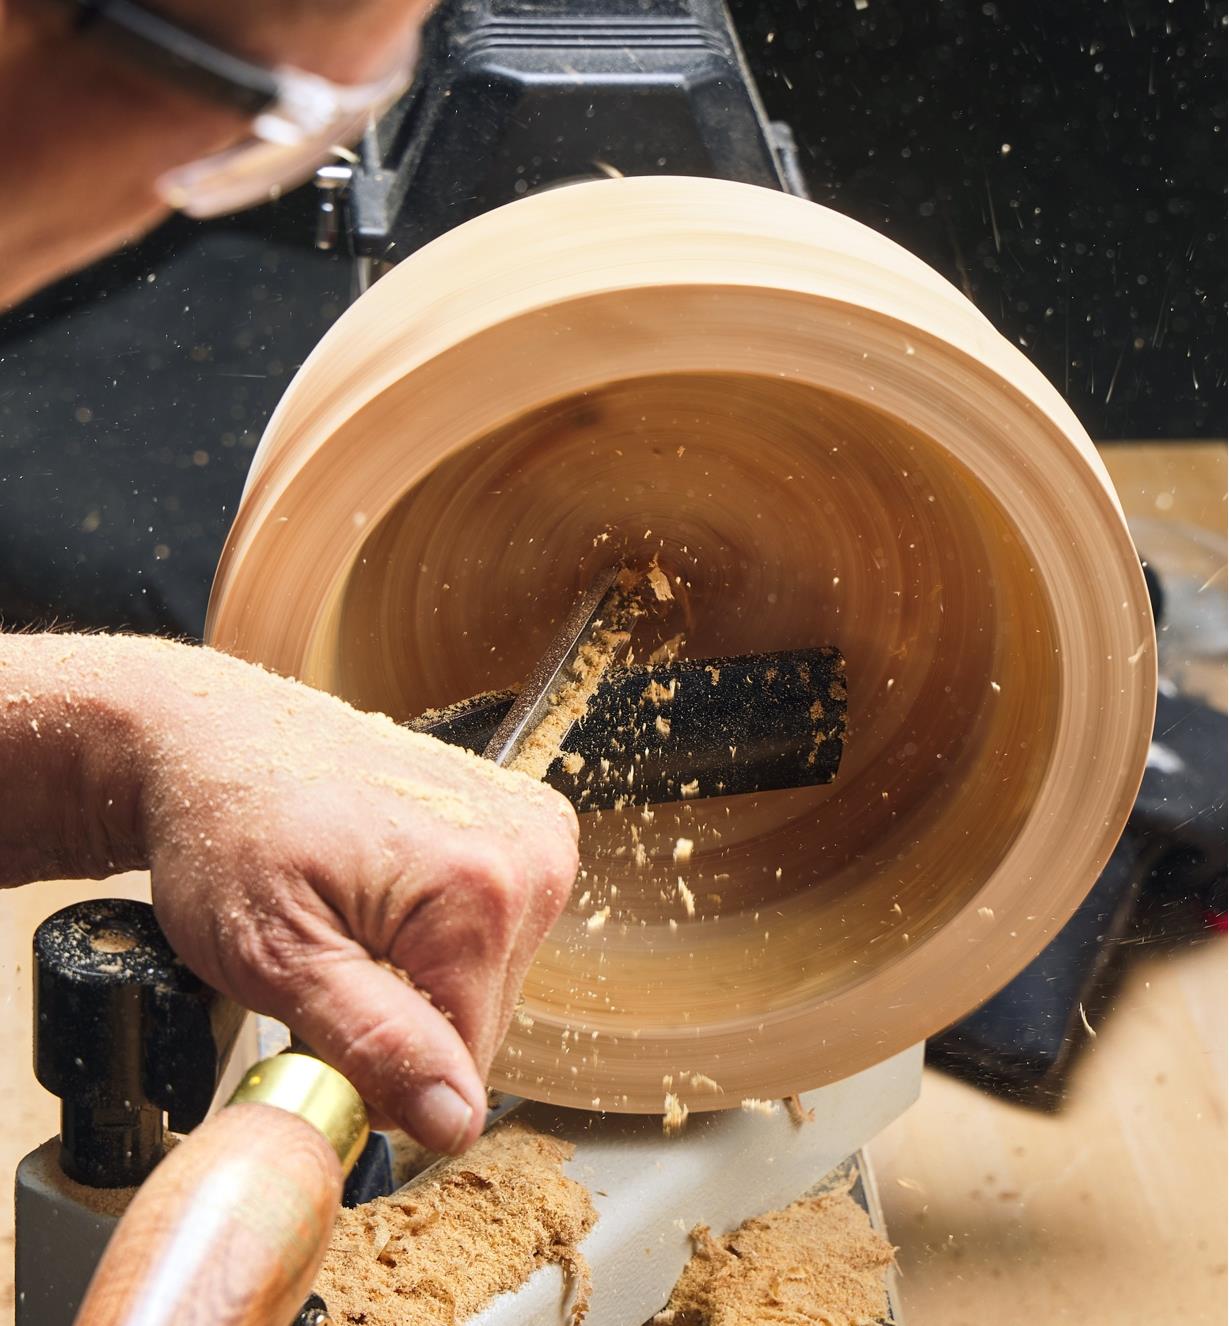 A gouge cutting the inside of a bowl blank while being supported on a curved rest